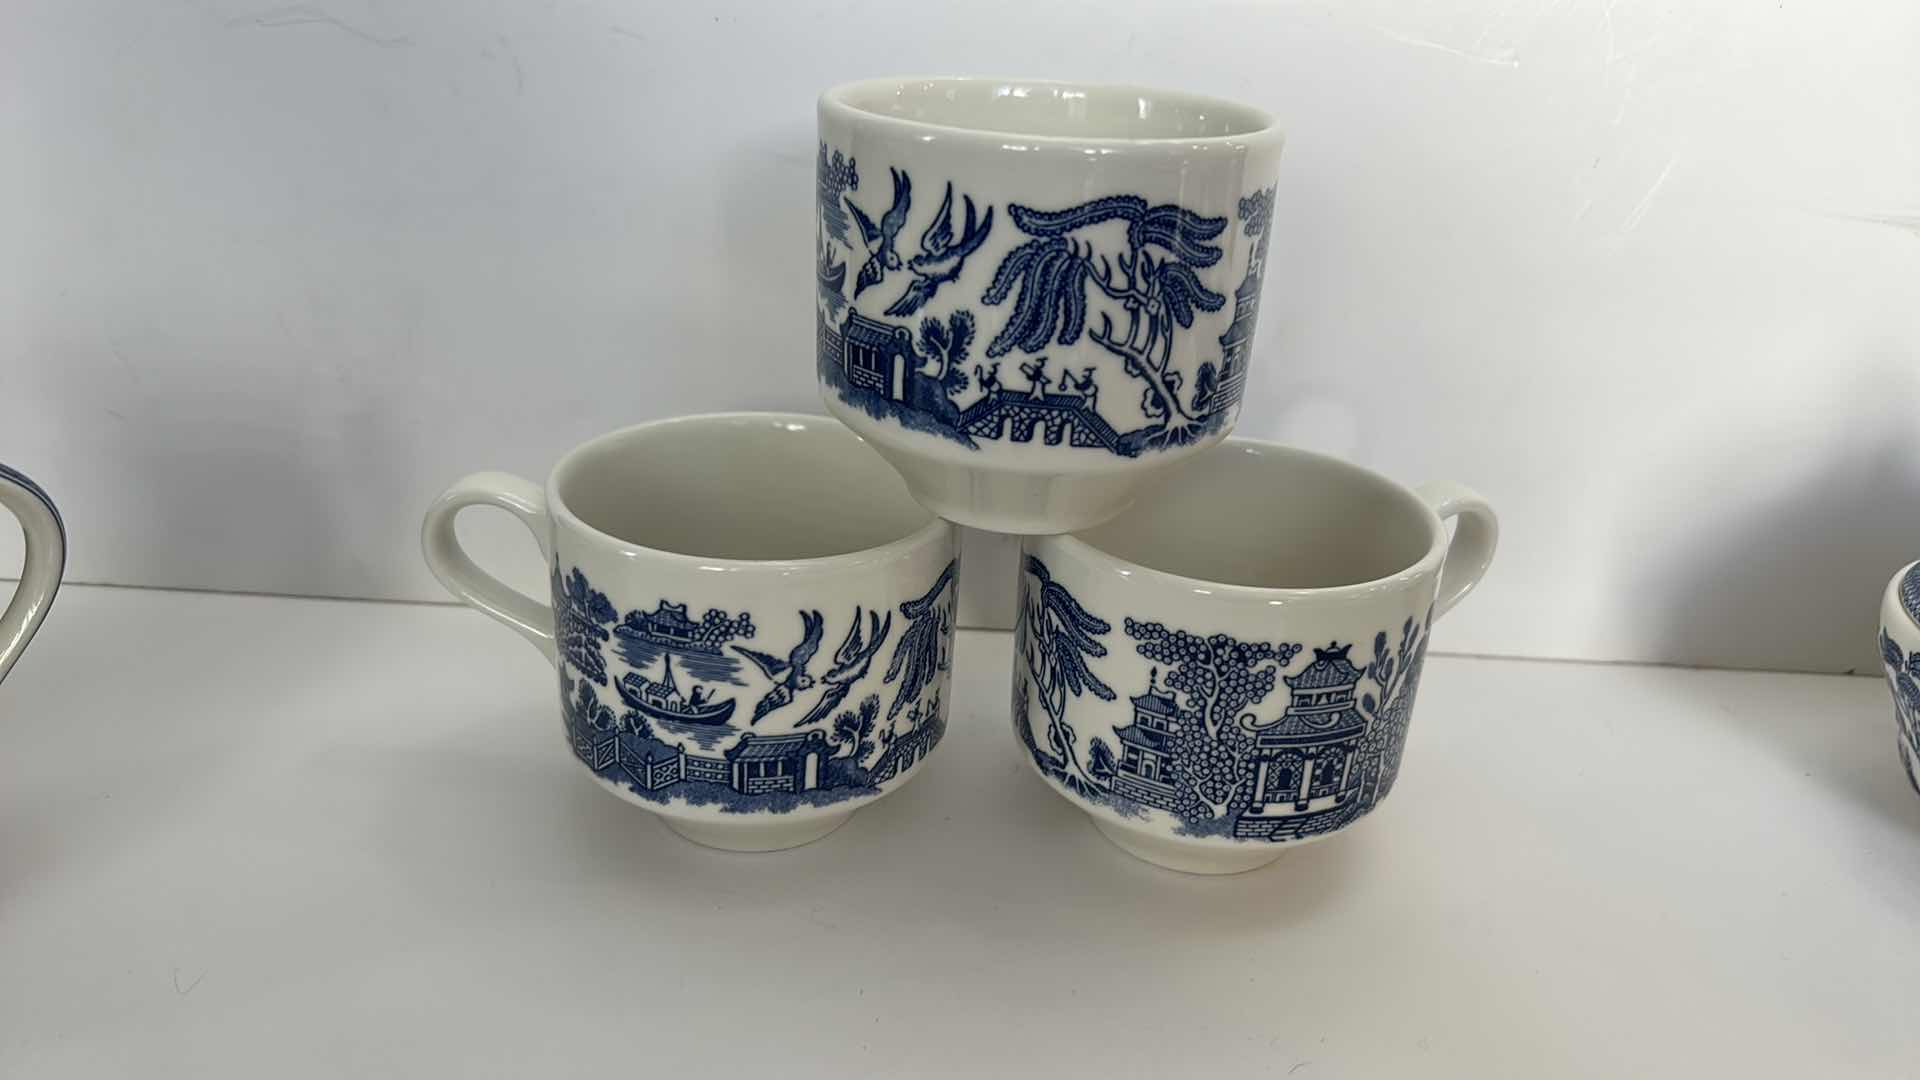 Photo 5 of BLUE AND WHITE PORCELAIN ASSORTMENT MADE IN ENGLAND